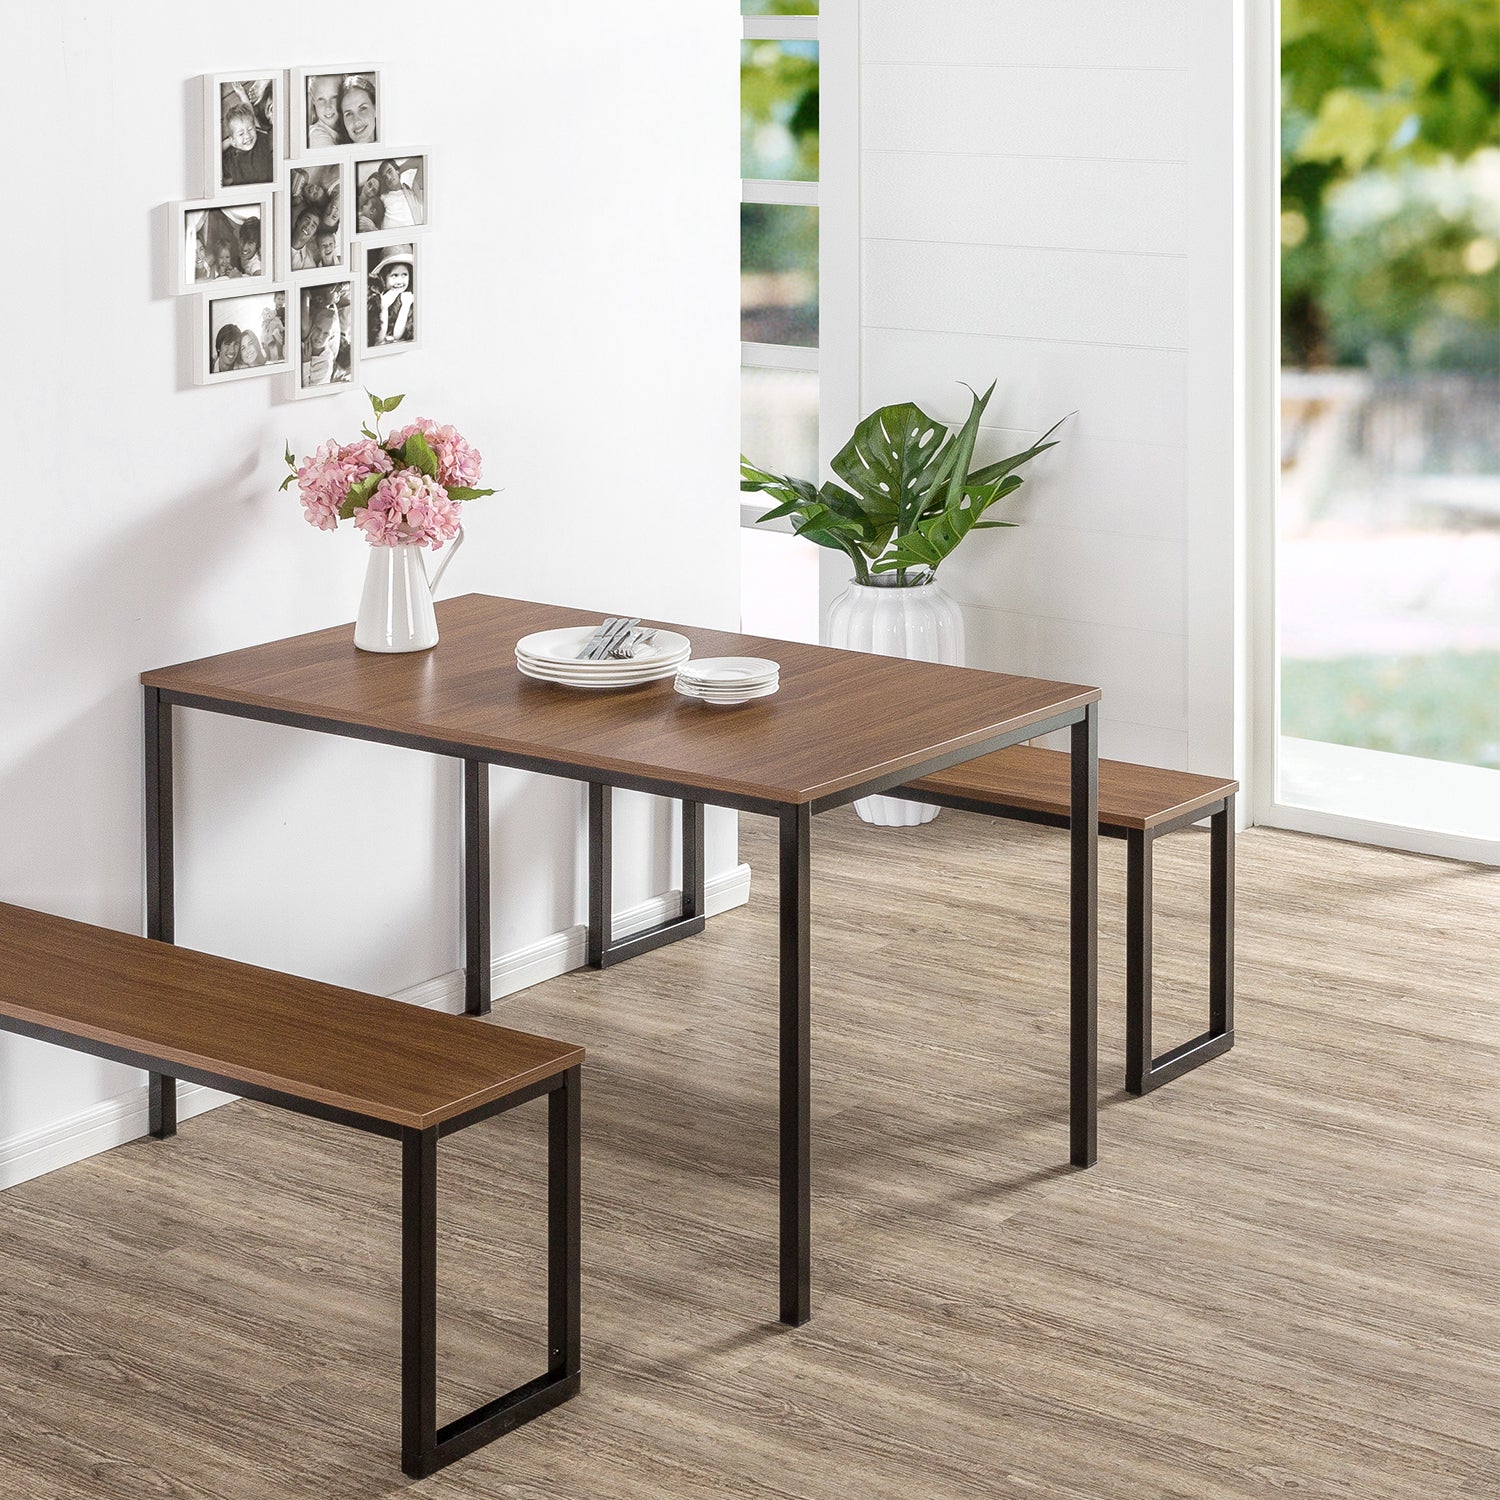 Zinus Modern Studio Collection Soho Dining Table with Two Benches